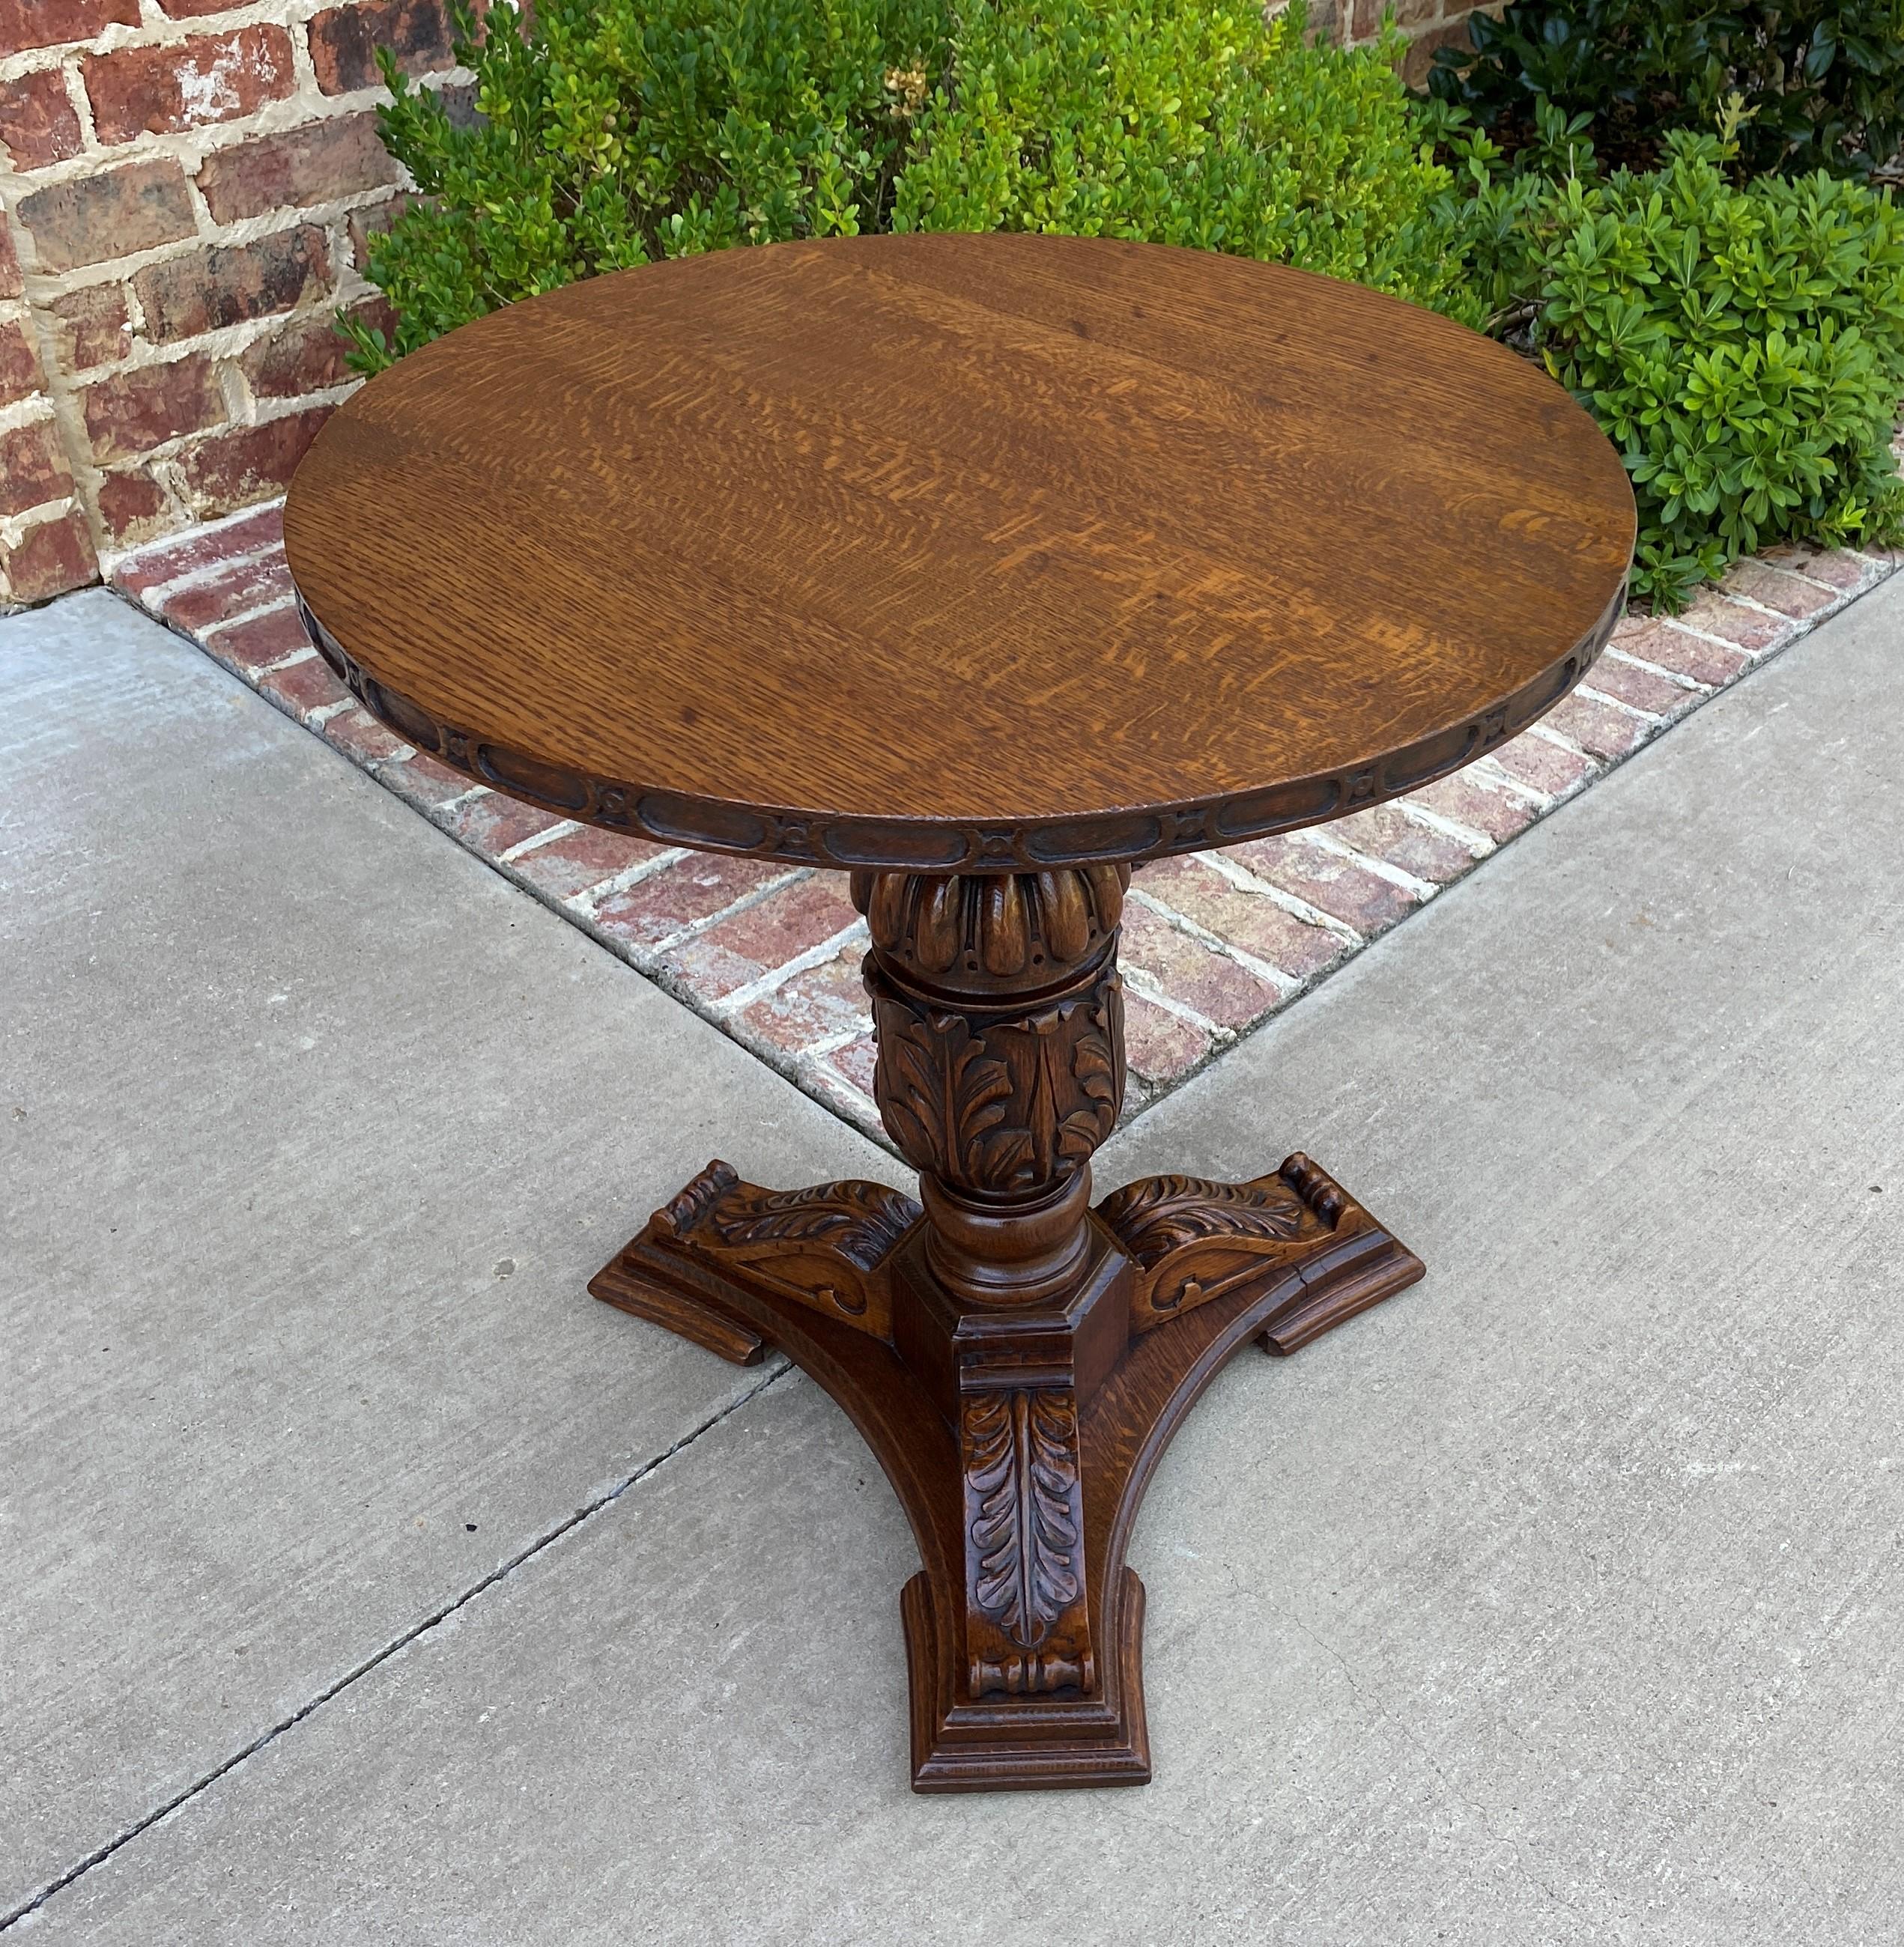 Superb highly carved late 19th century antique English oak round end table, occasional table or nightstand/bed table ~~Victorian Era Renaissance Revival ~~c. 1890s

Round tables are so hard to find~~beautiful and versatile size with elaborate